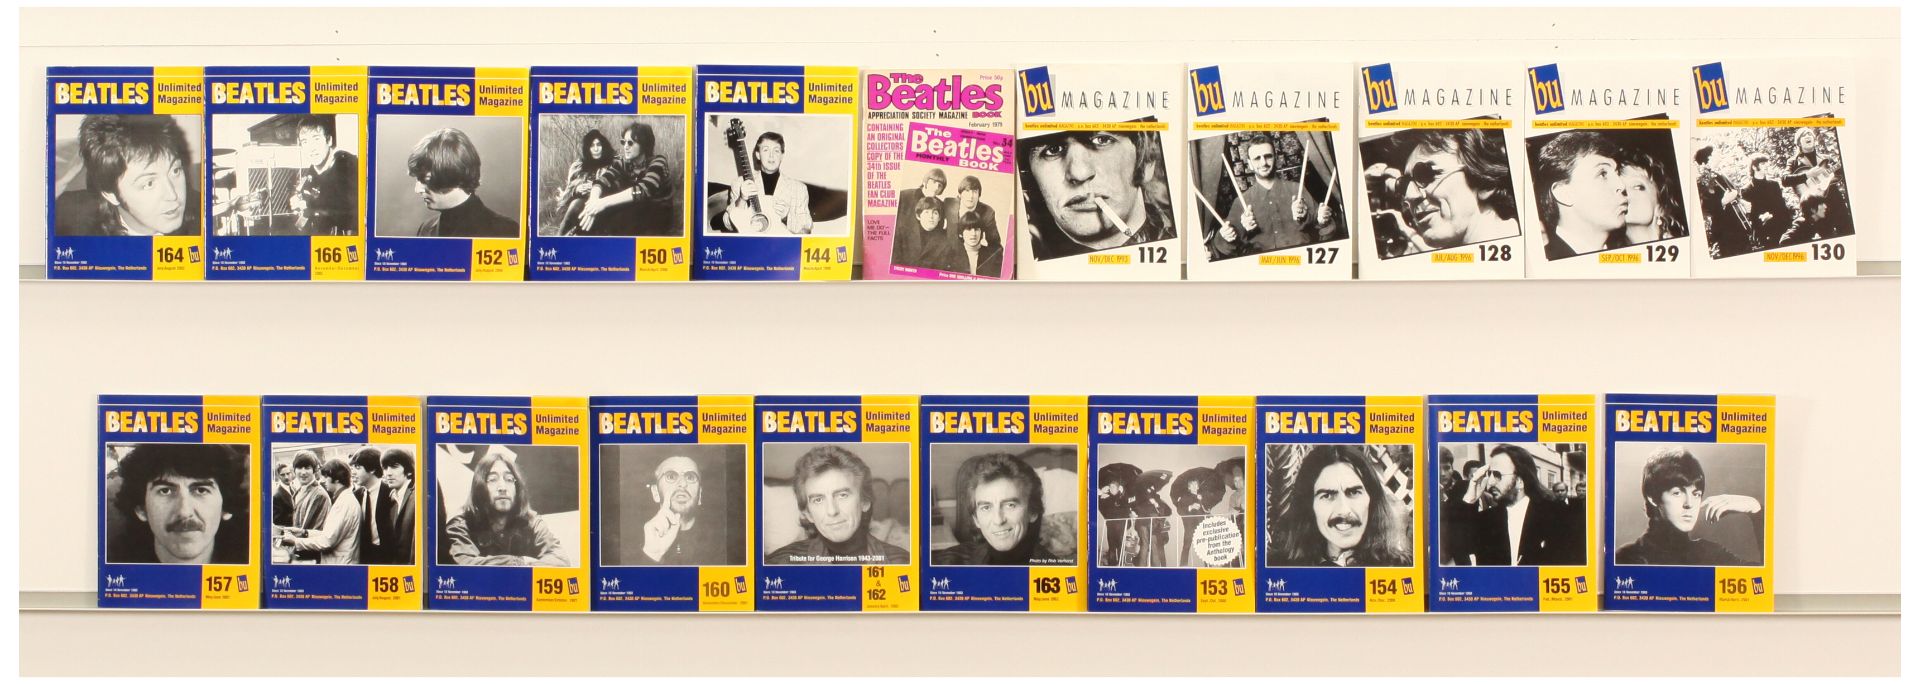 The Beatles Unlimited Magazines